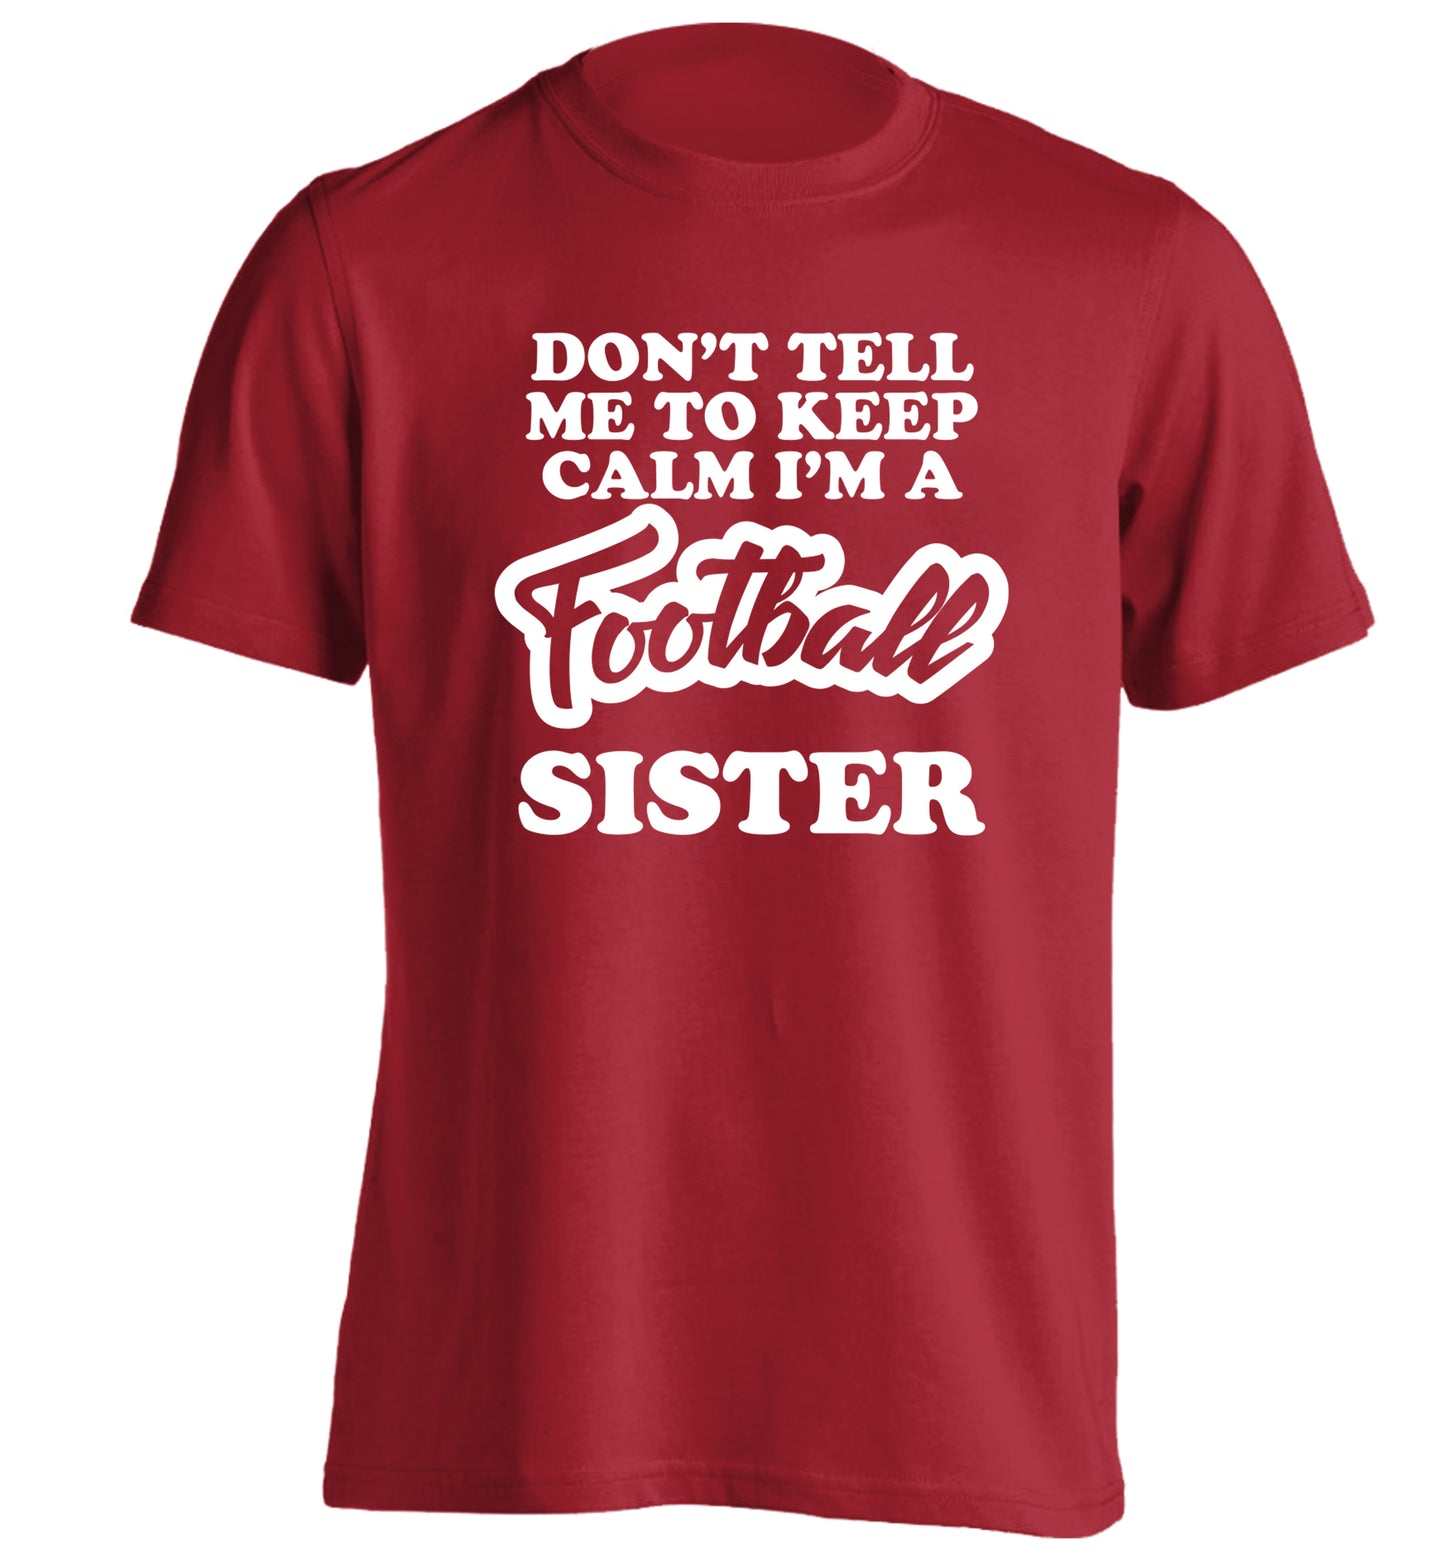 Don't tell me to keep calm I'm a football sister adults unisexred Tshirt 2XL